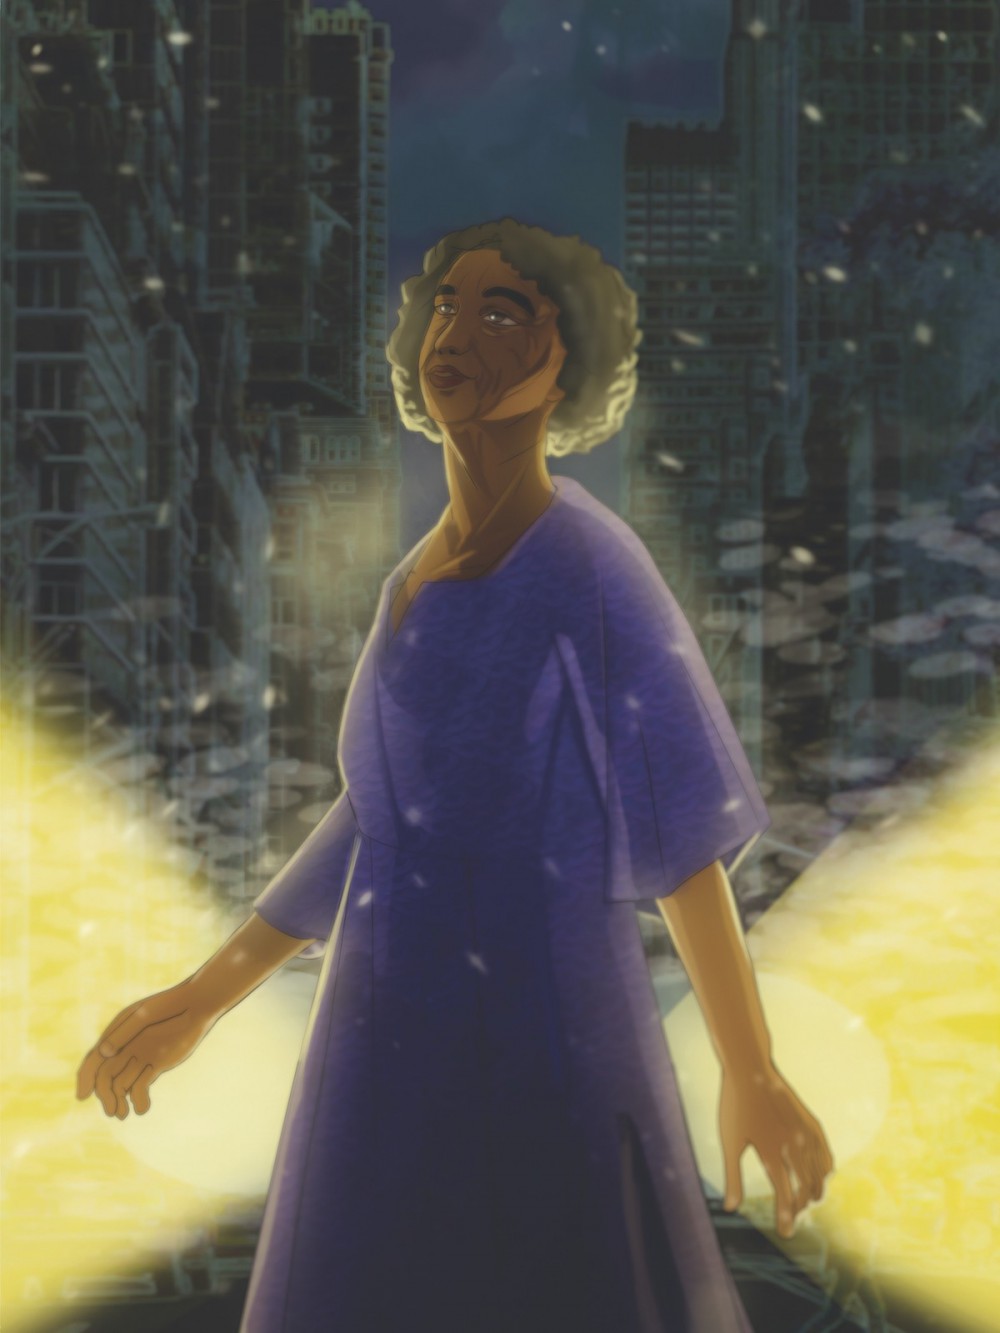 A digital illustration of an older Black woman crossing the street. She wears a purple dress and is looking off into the distance. Close behind her, two bright yellow car headlights loom. In the background, city skyscrapers and smog crowd the sky.